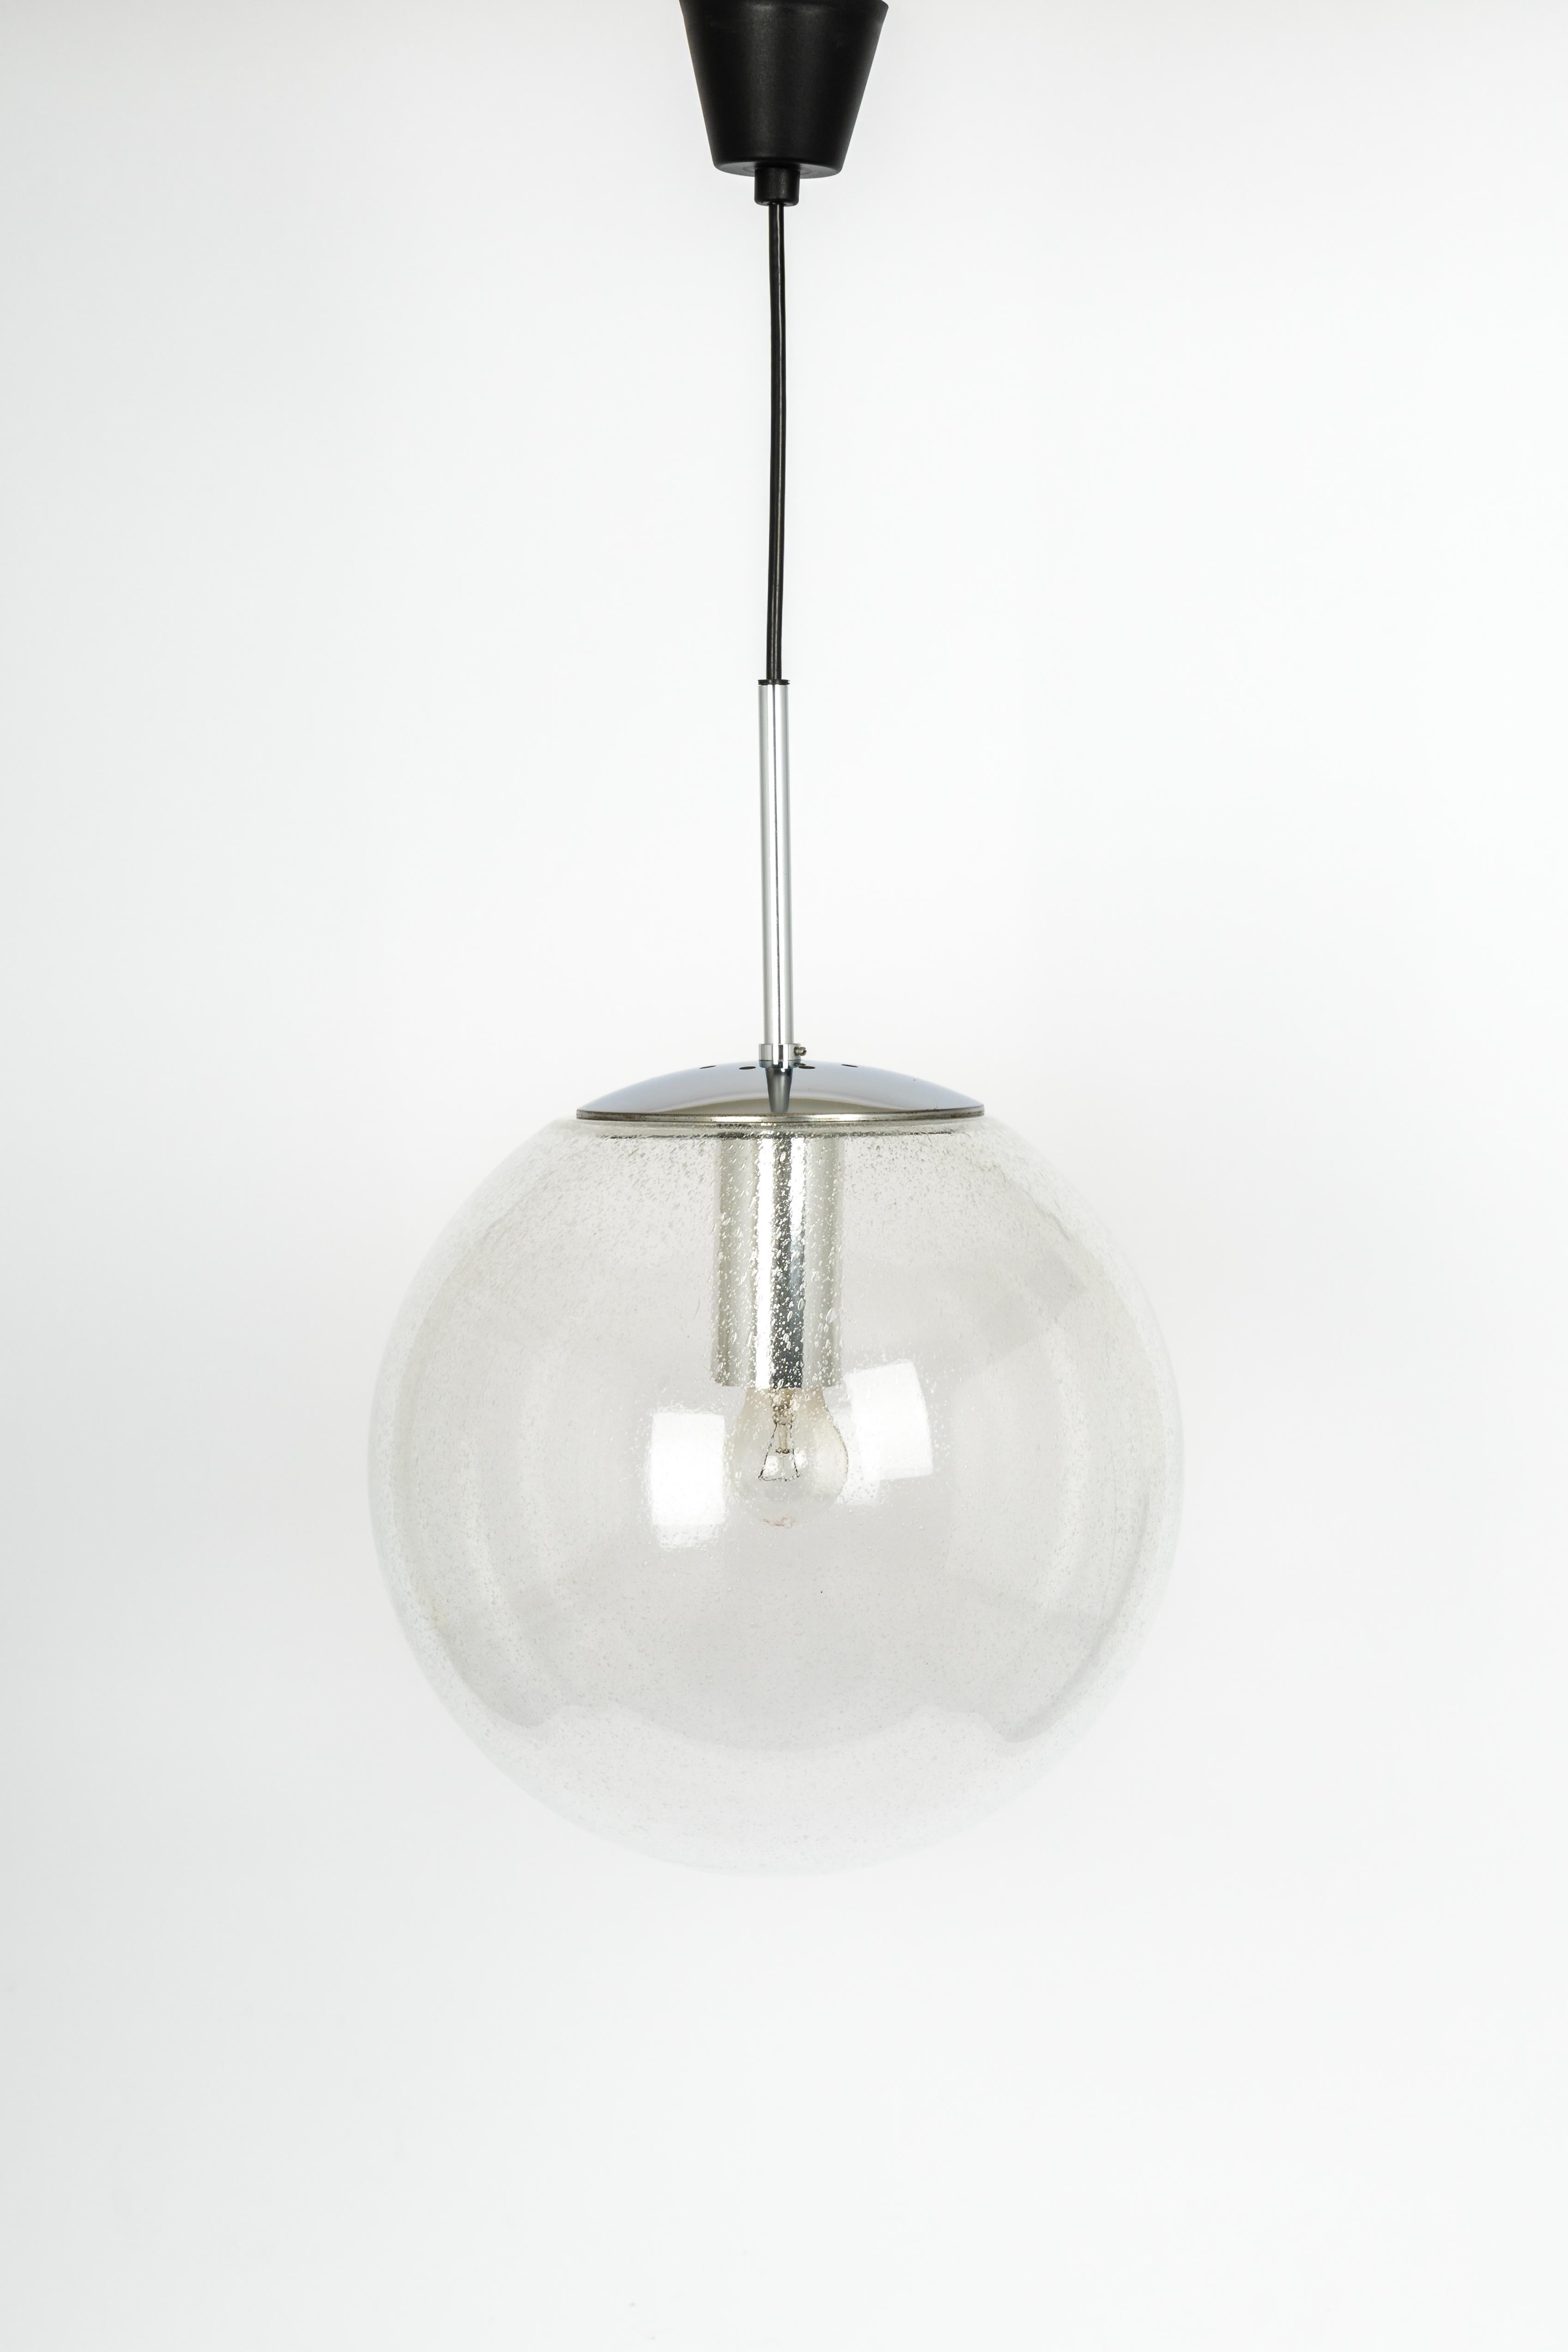 Smoked Glass 1 of 3 Large Limburg Chrome with Clear Glass Ball Pendant, Germany, 1970s For Sale